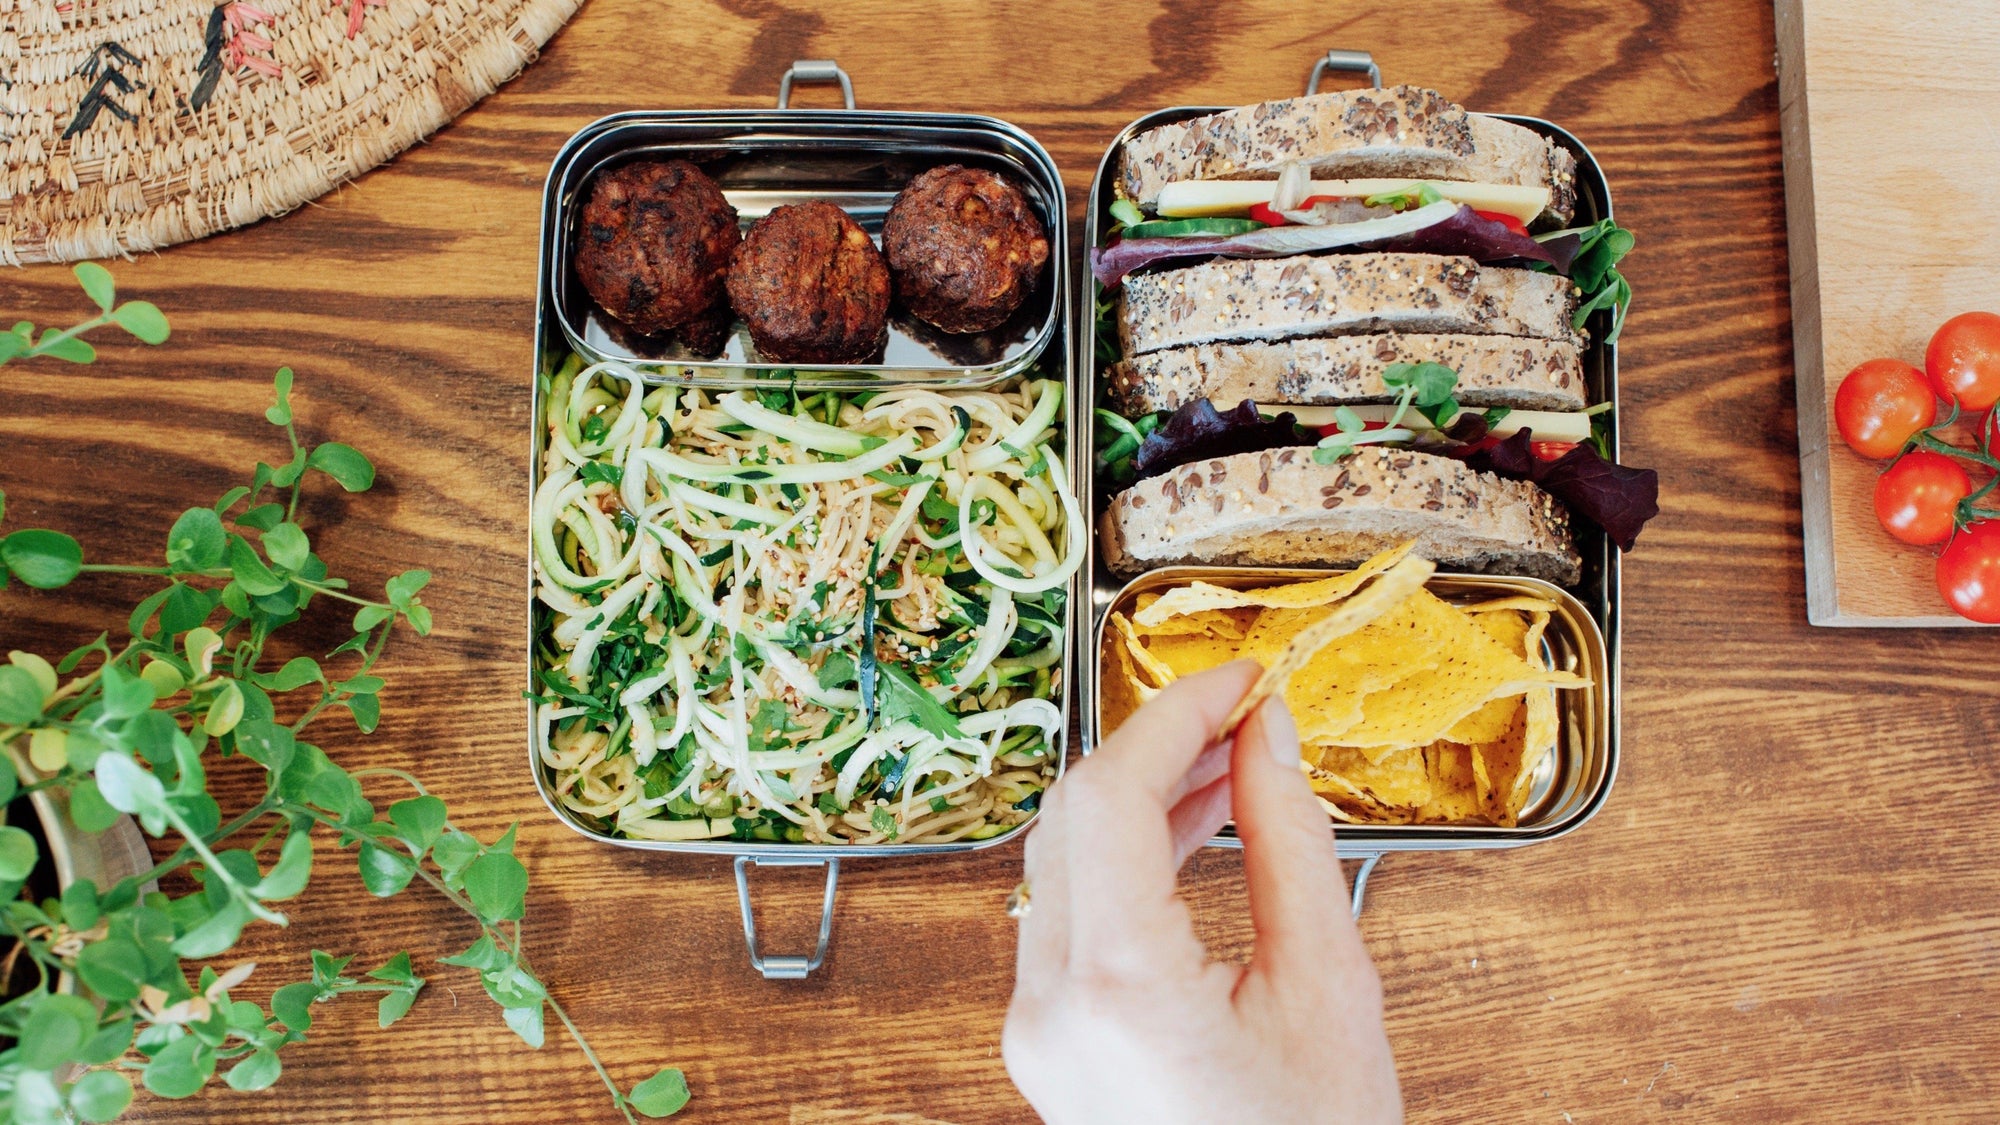 25 HEALTHY VEGAN PACKED LUNCHES